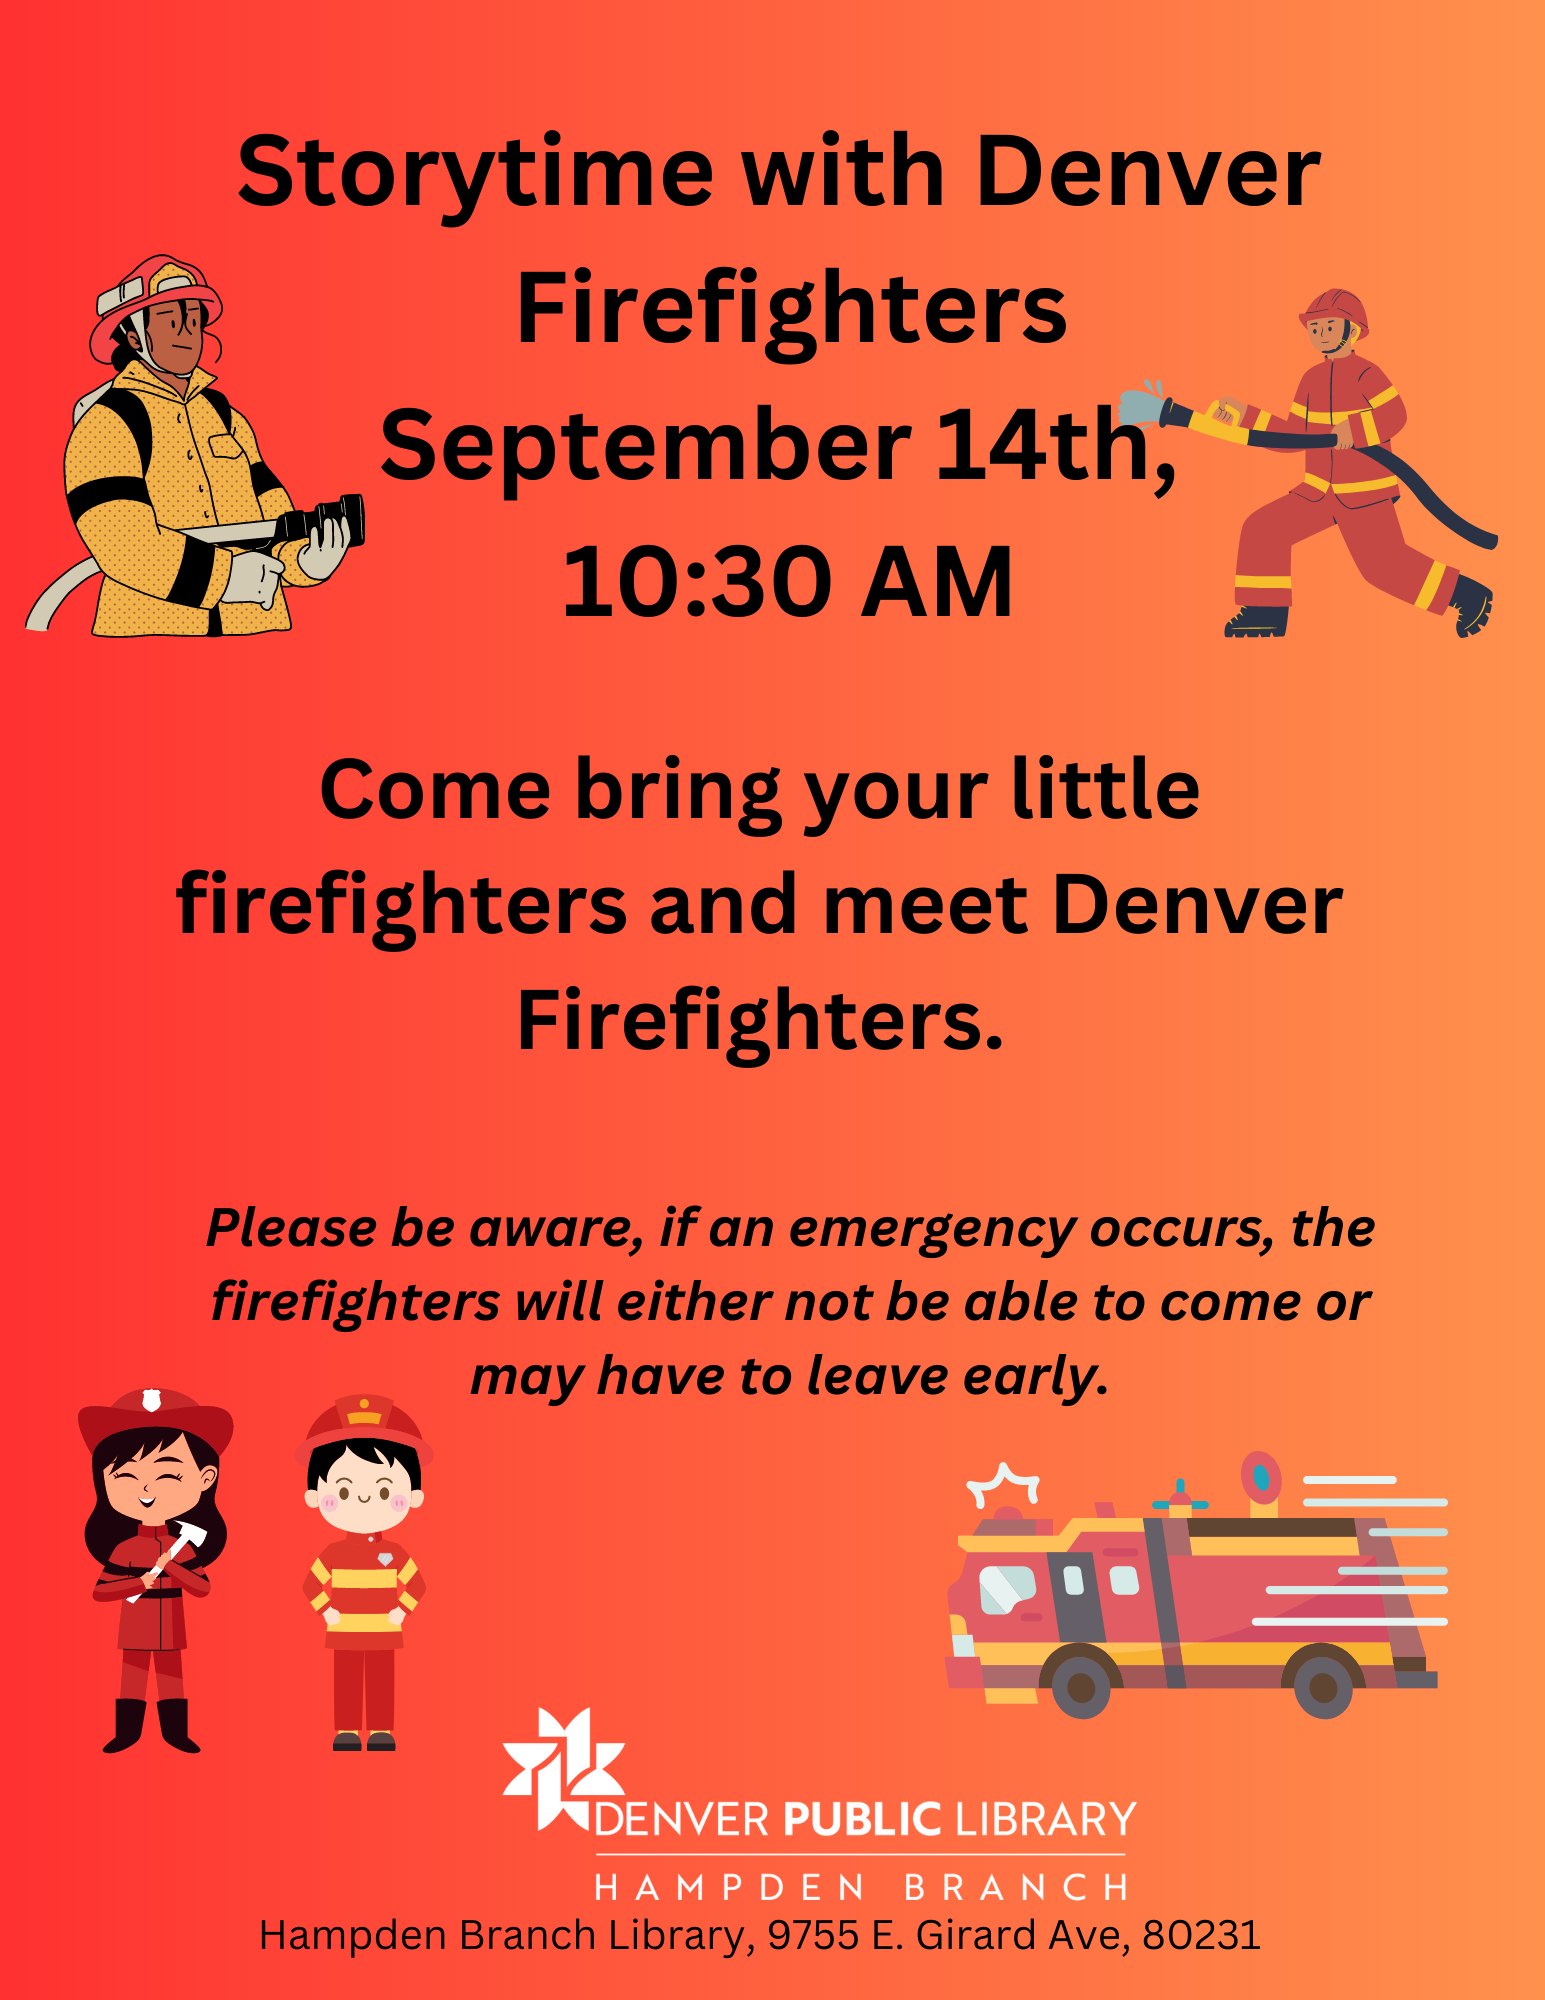 Storytime with Denver Firefighters